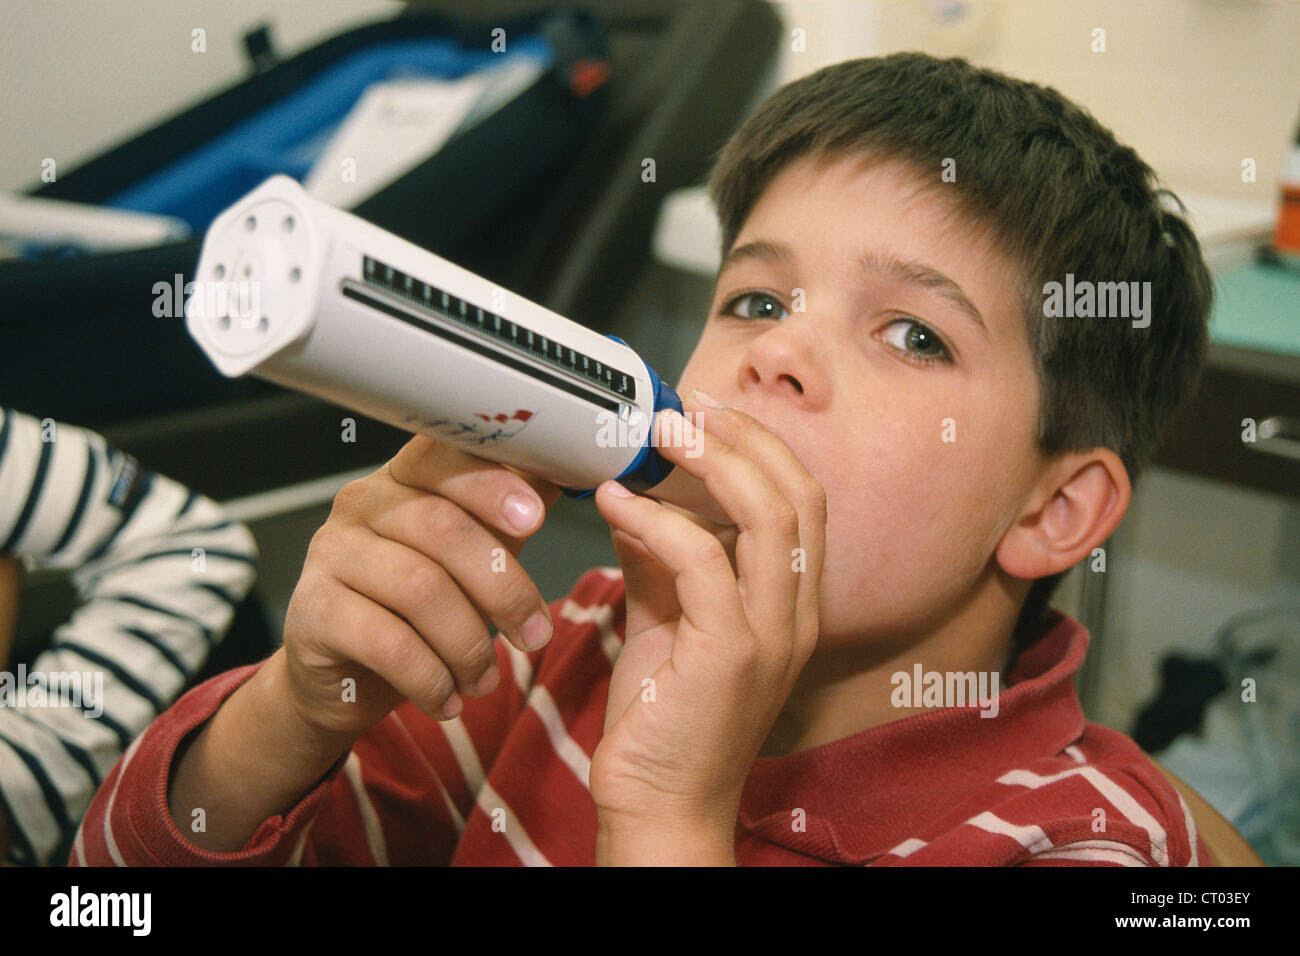 Man Blowing Into A Peak Flow Meter To Check From Asthma